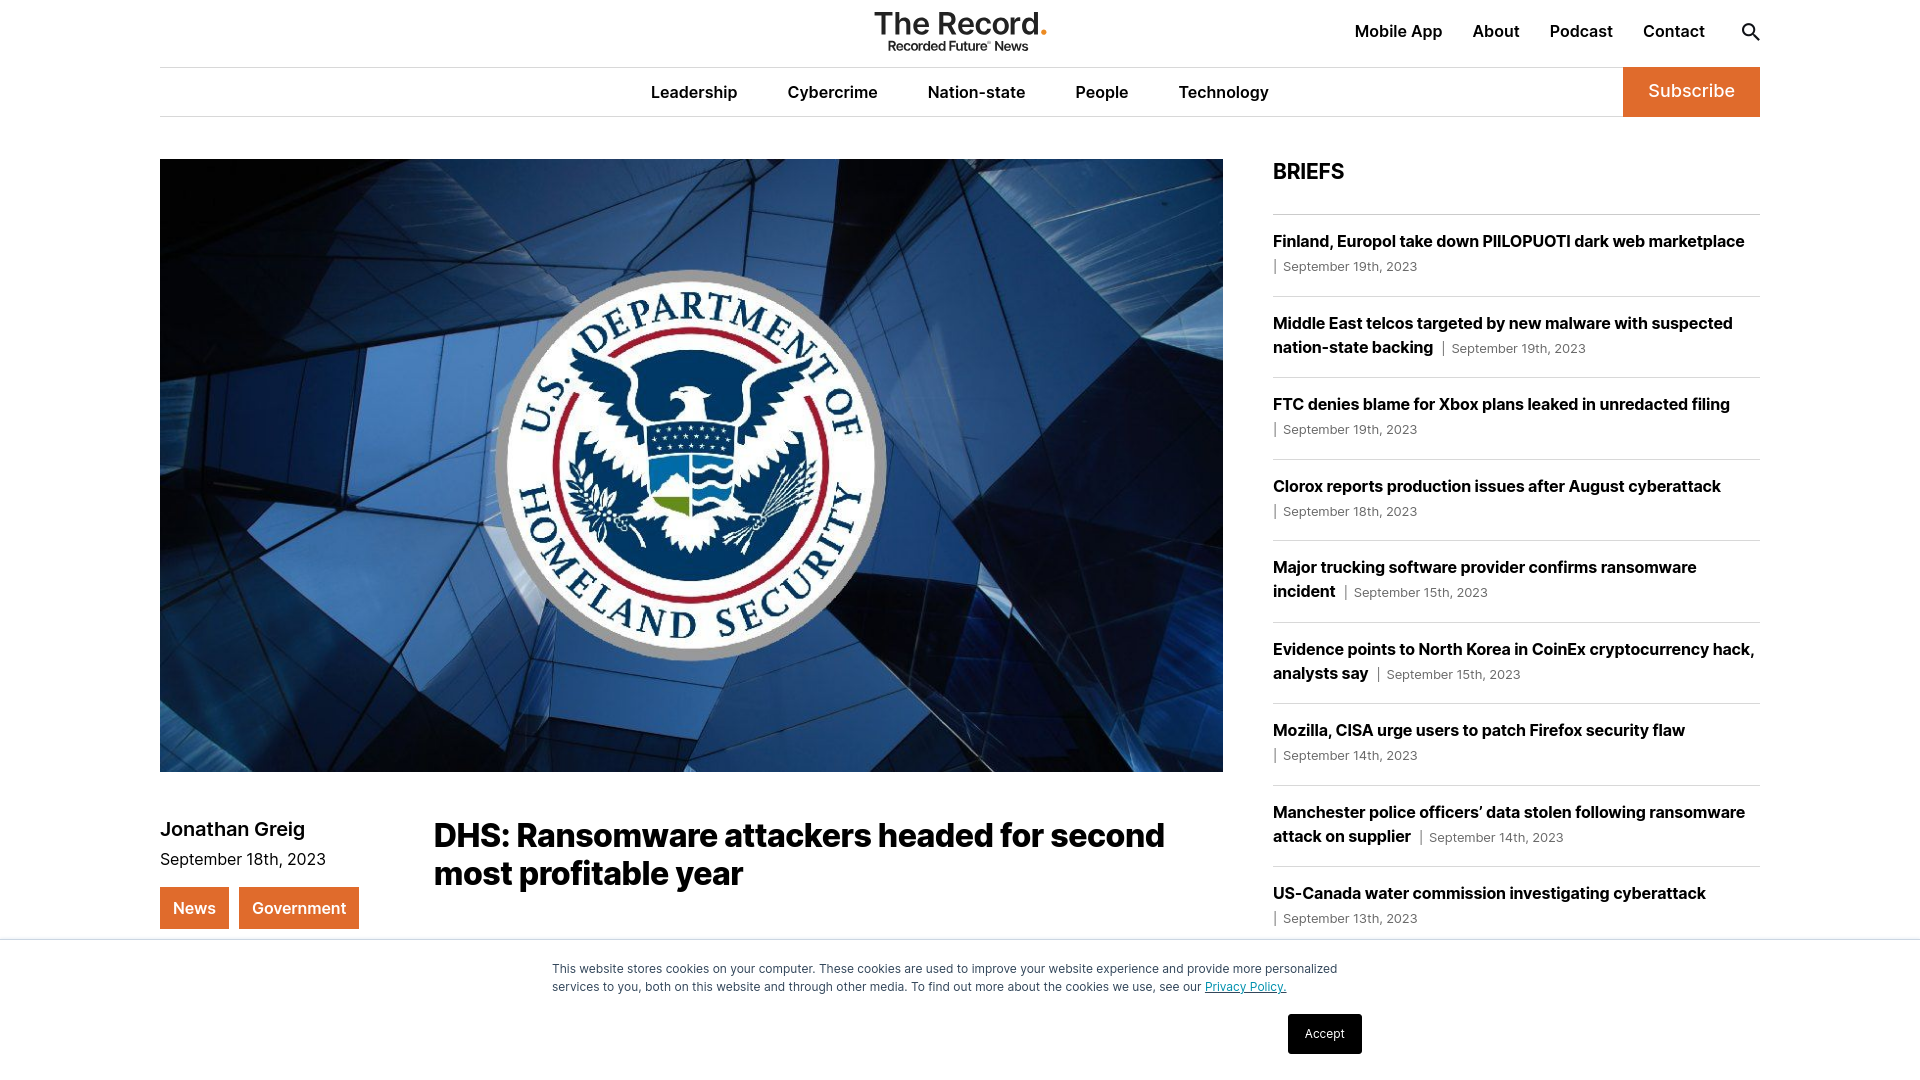 DHS: Ransomware attackers headed for second most profitable year